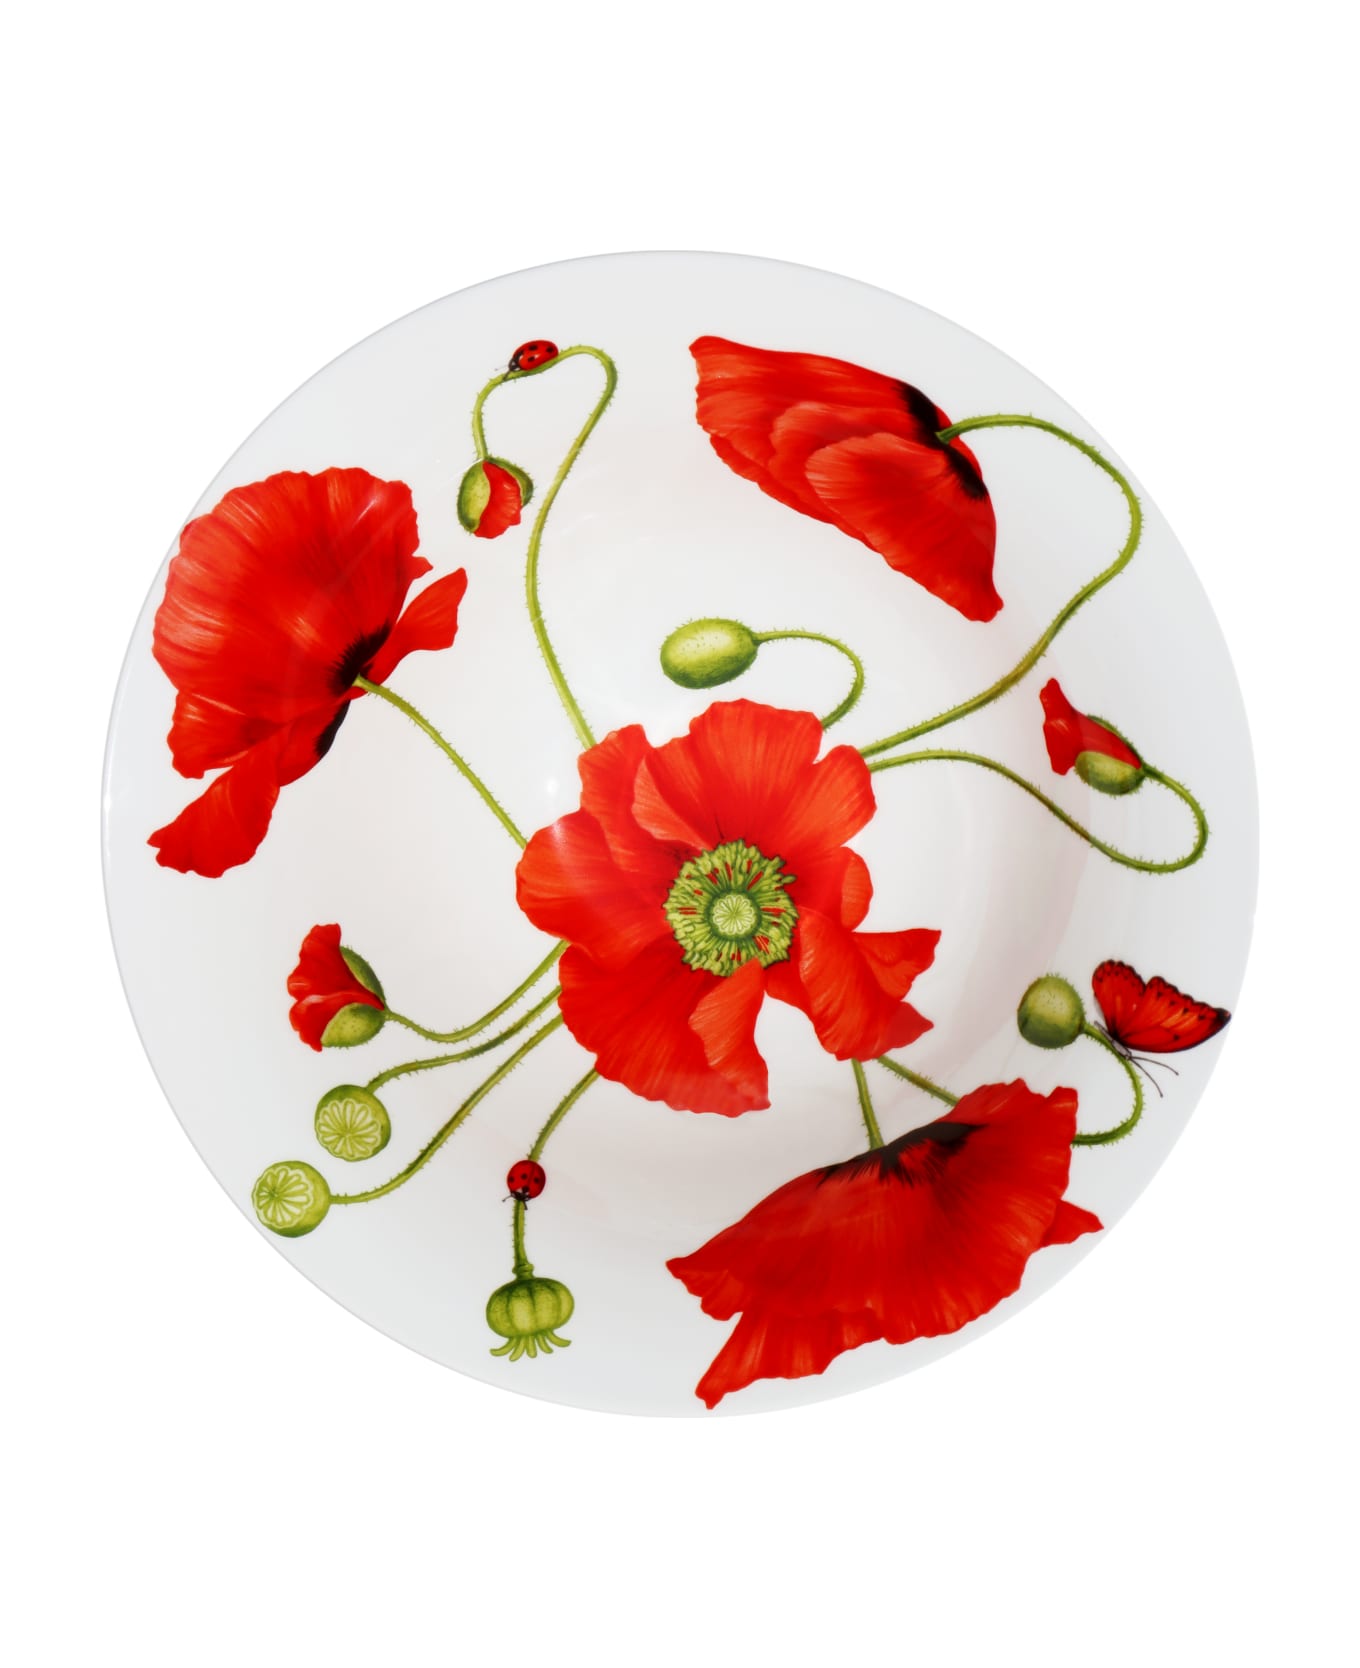 Taitù Set of 4 Small Bowls RED BUTTERFLY - RED Collection - Red